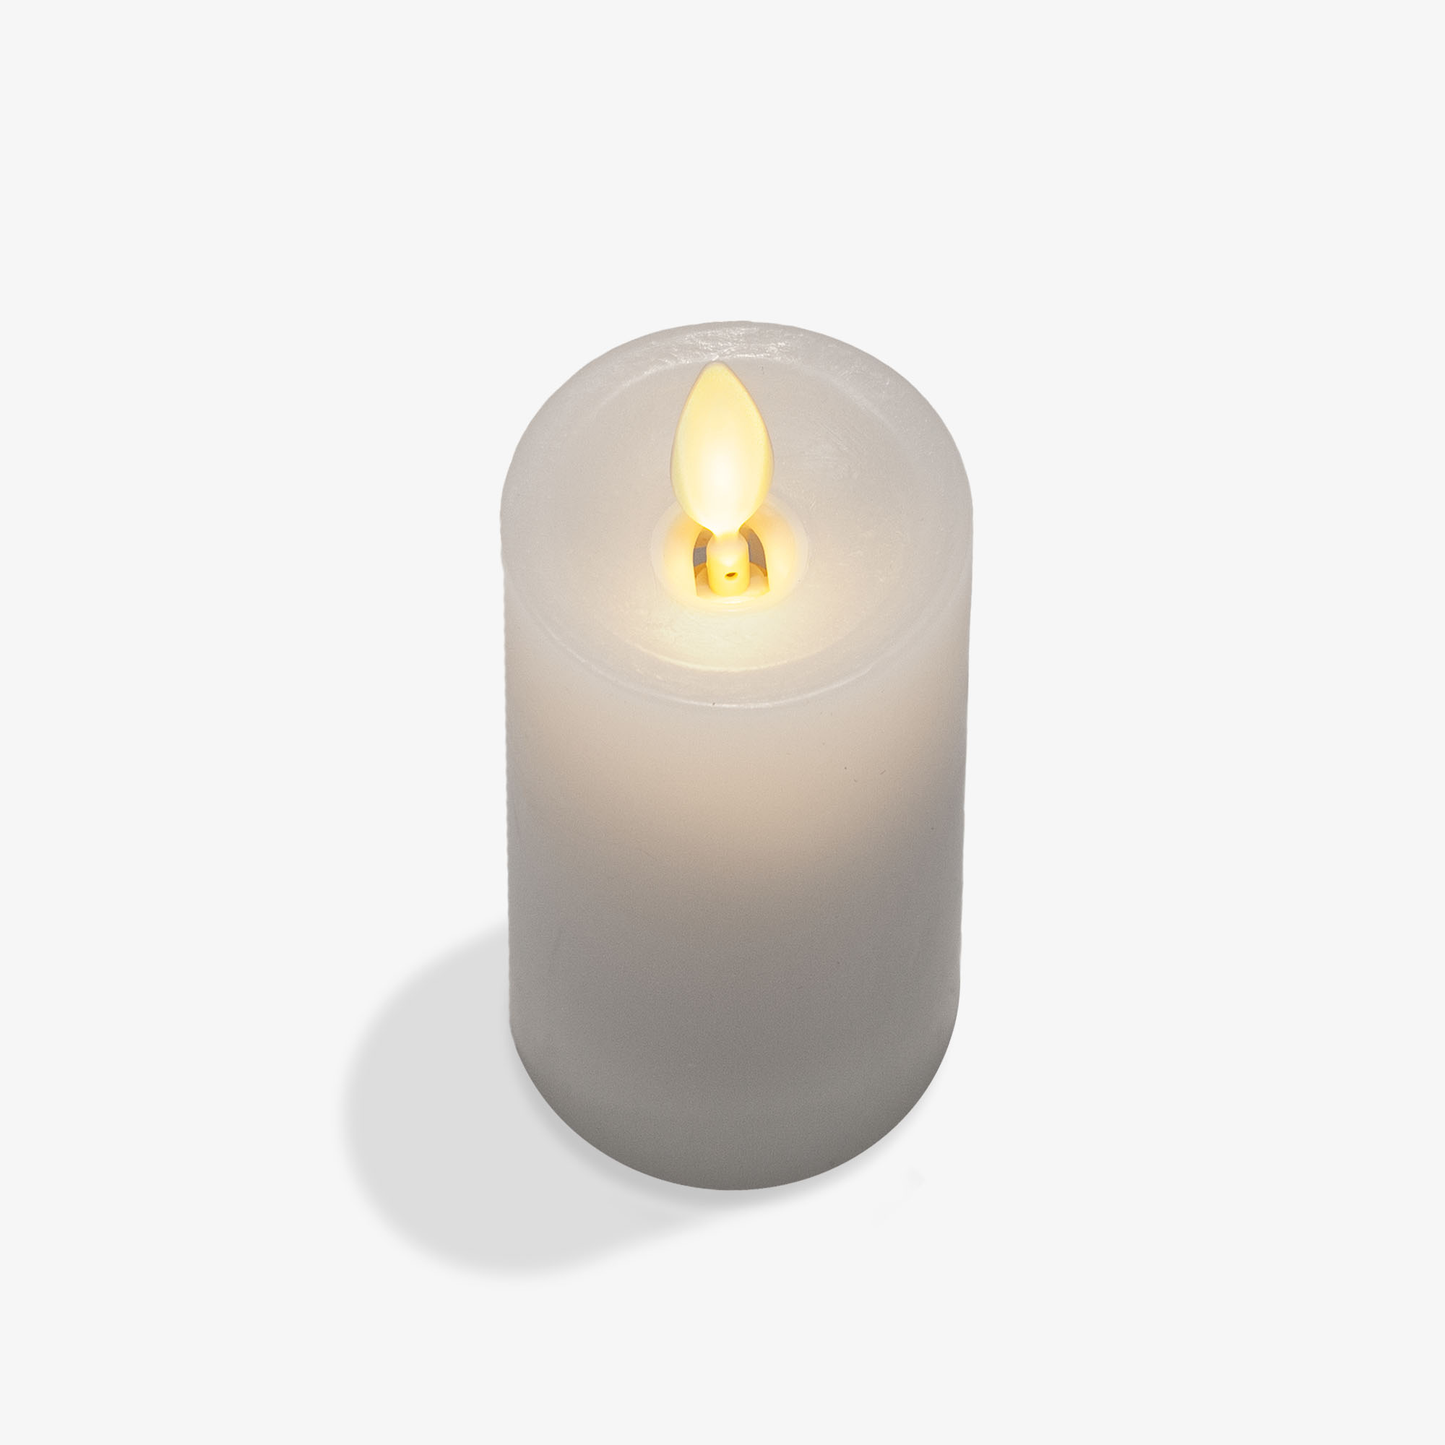 White Flameless Candle Slim Pillar - Recessed Top